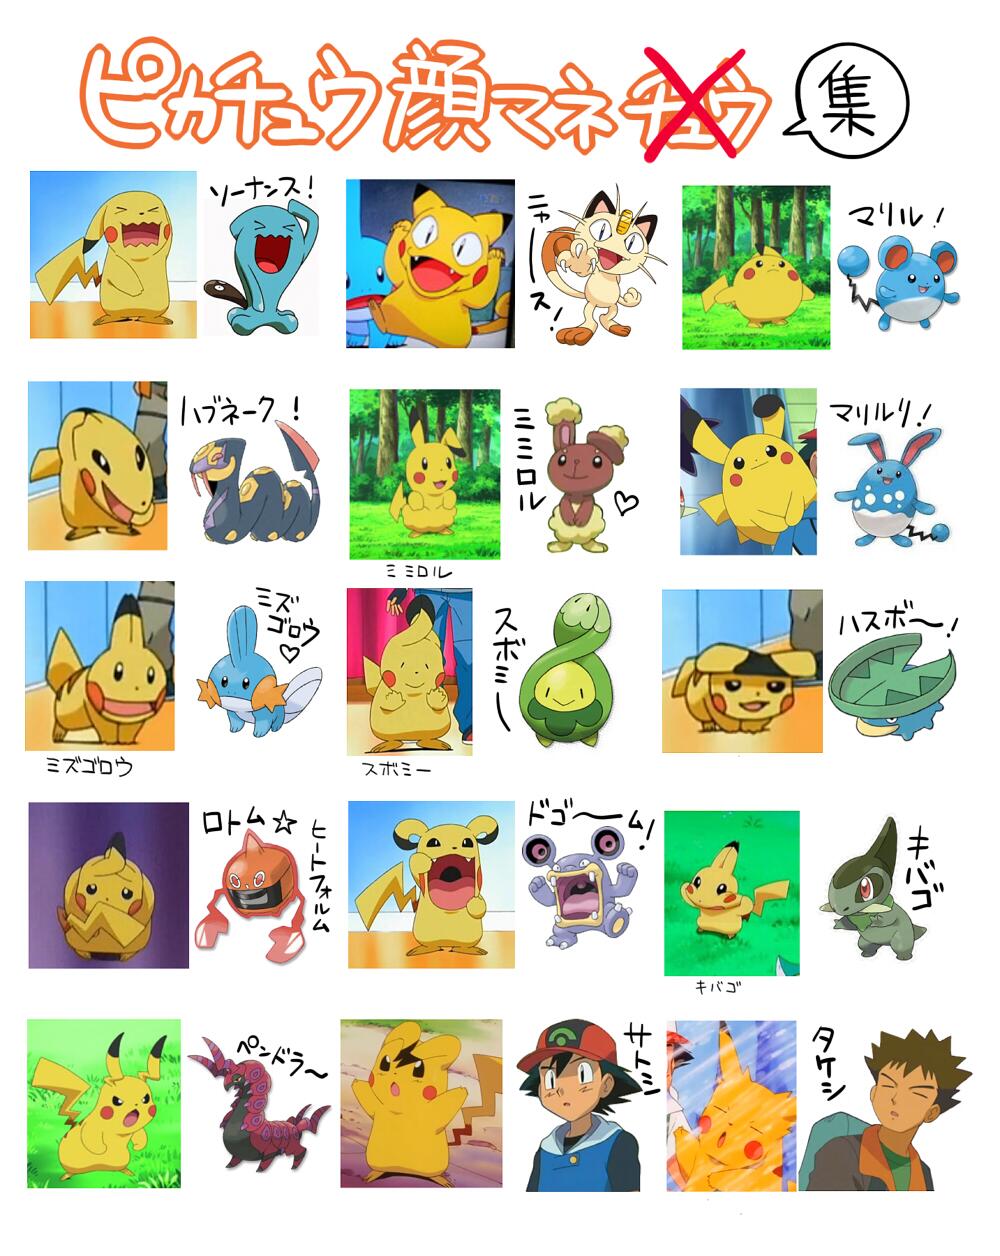 Pikachu Is Great At Impersonating Other Pokémon Characters